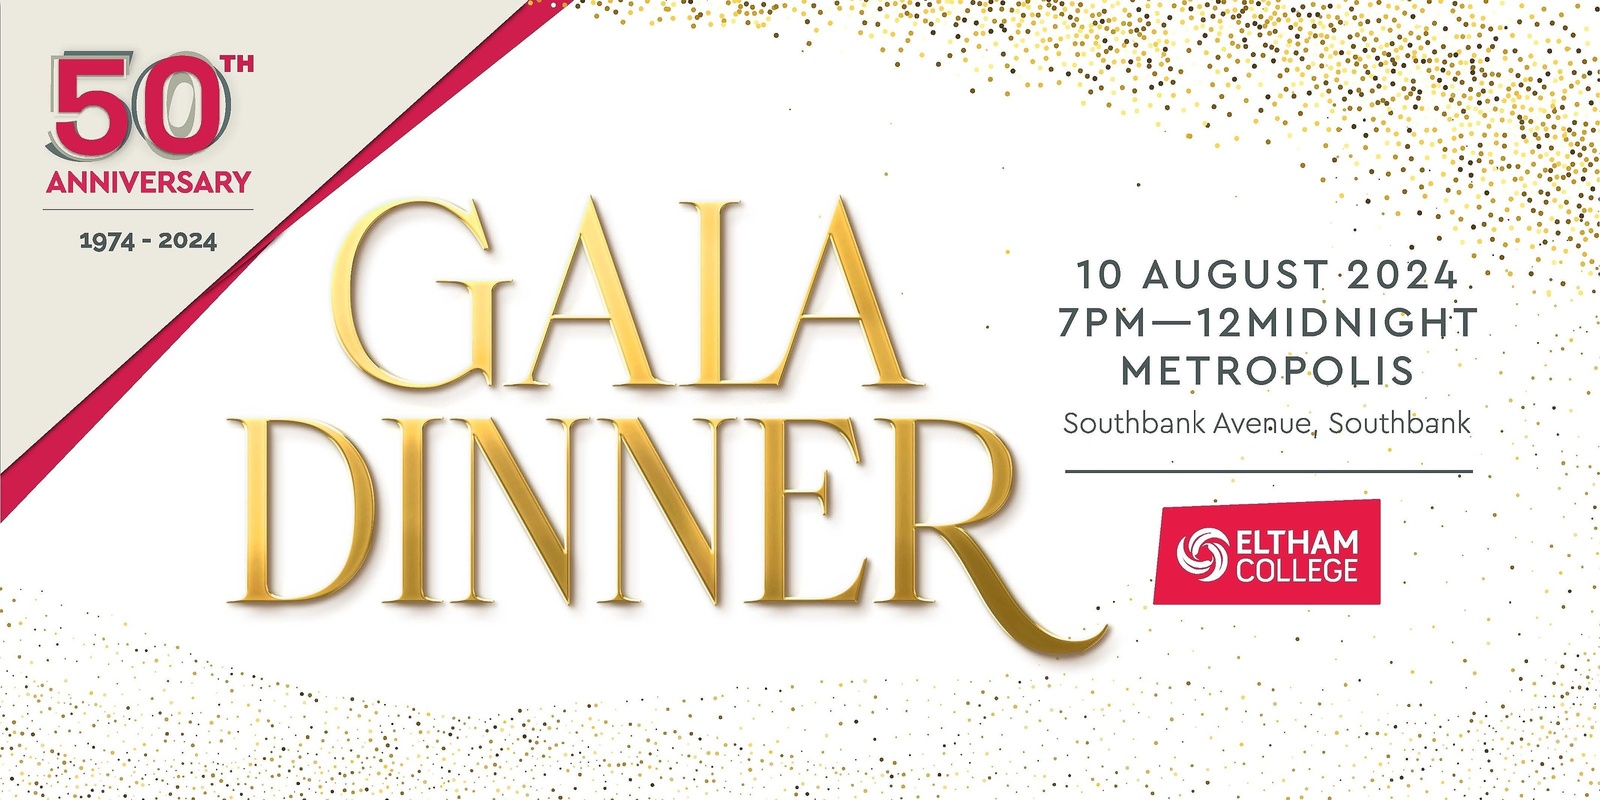 Banner image for 50th Anniversary Gala Dinner